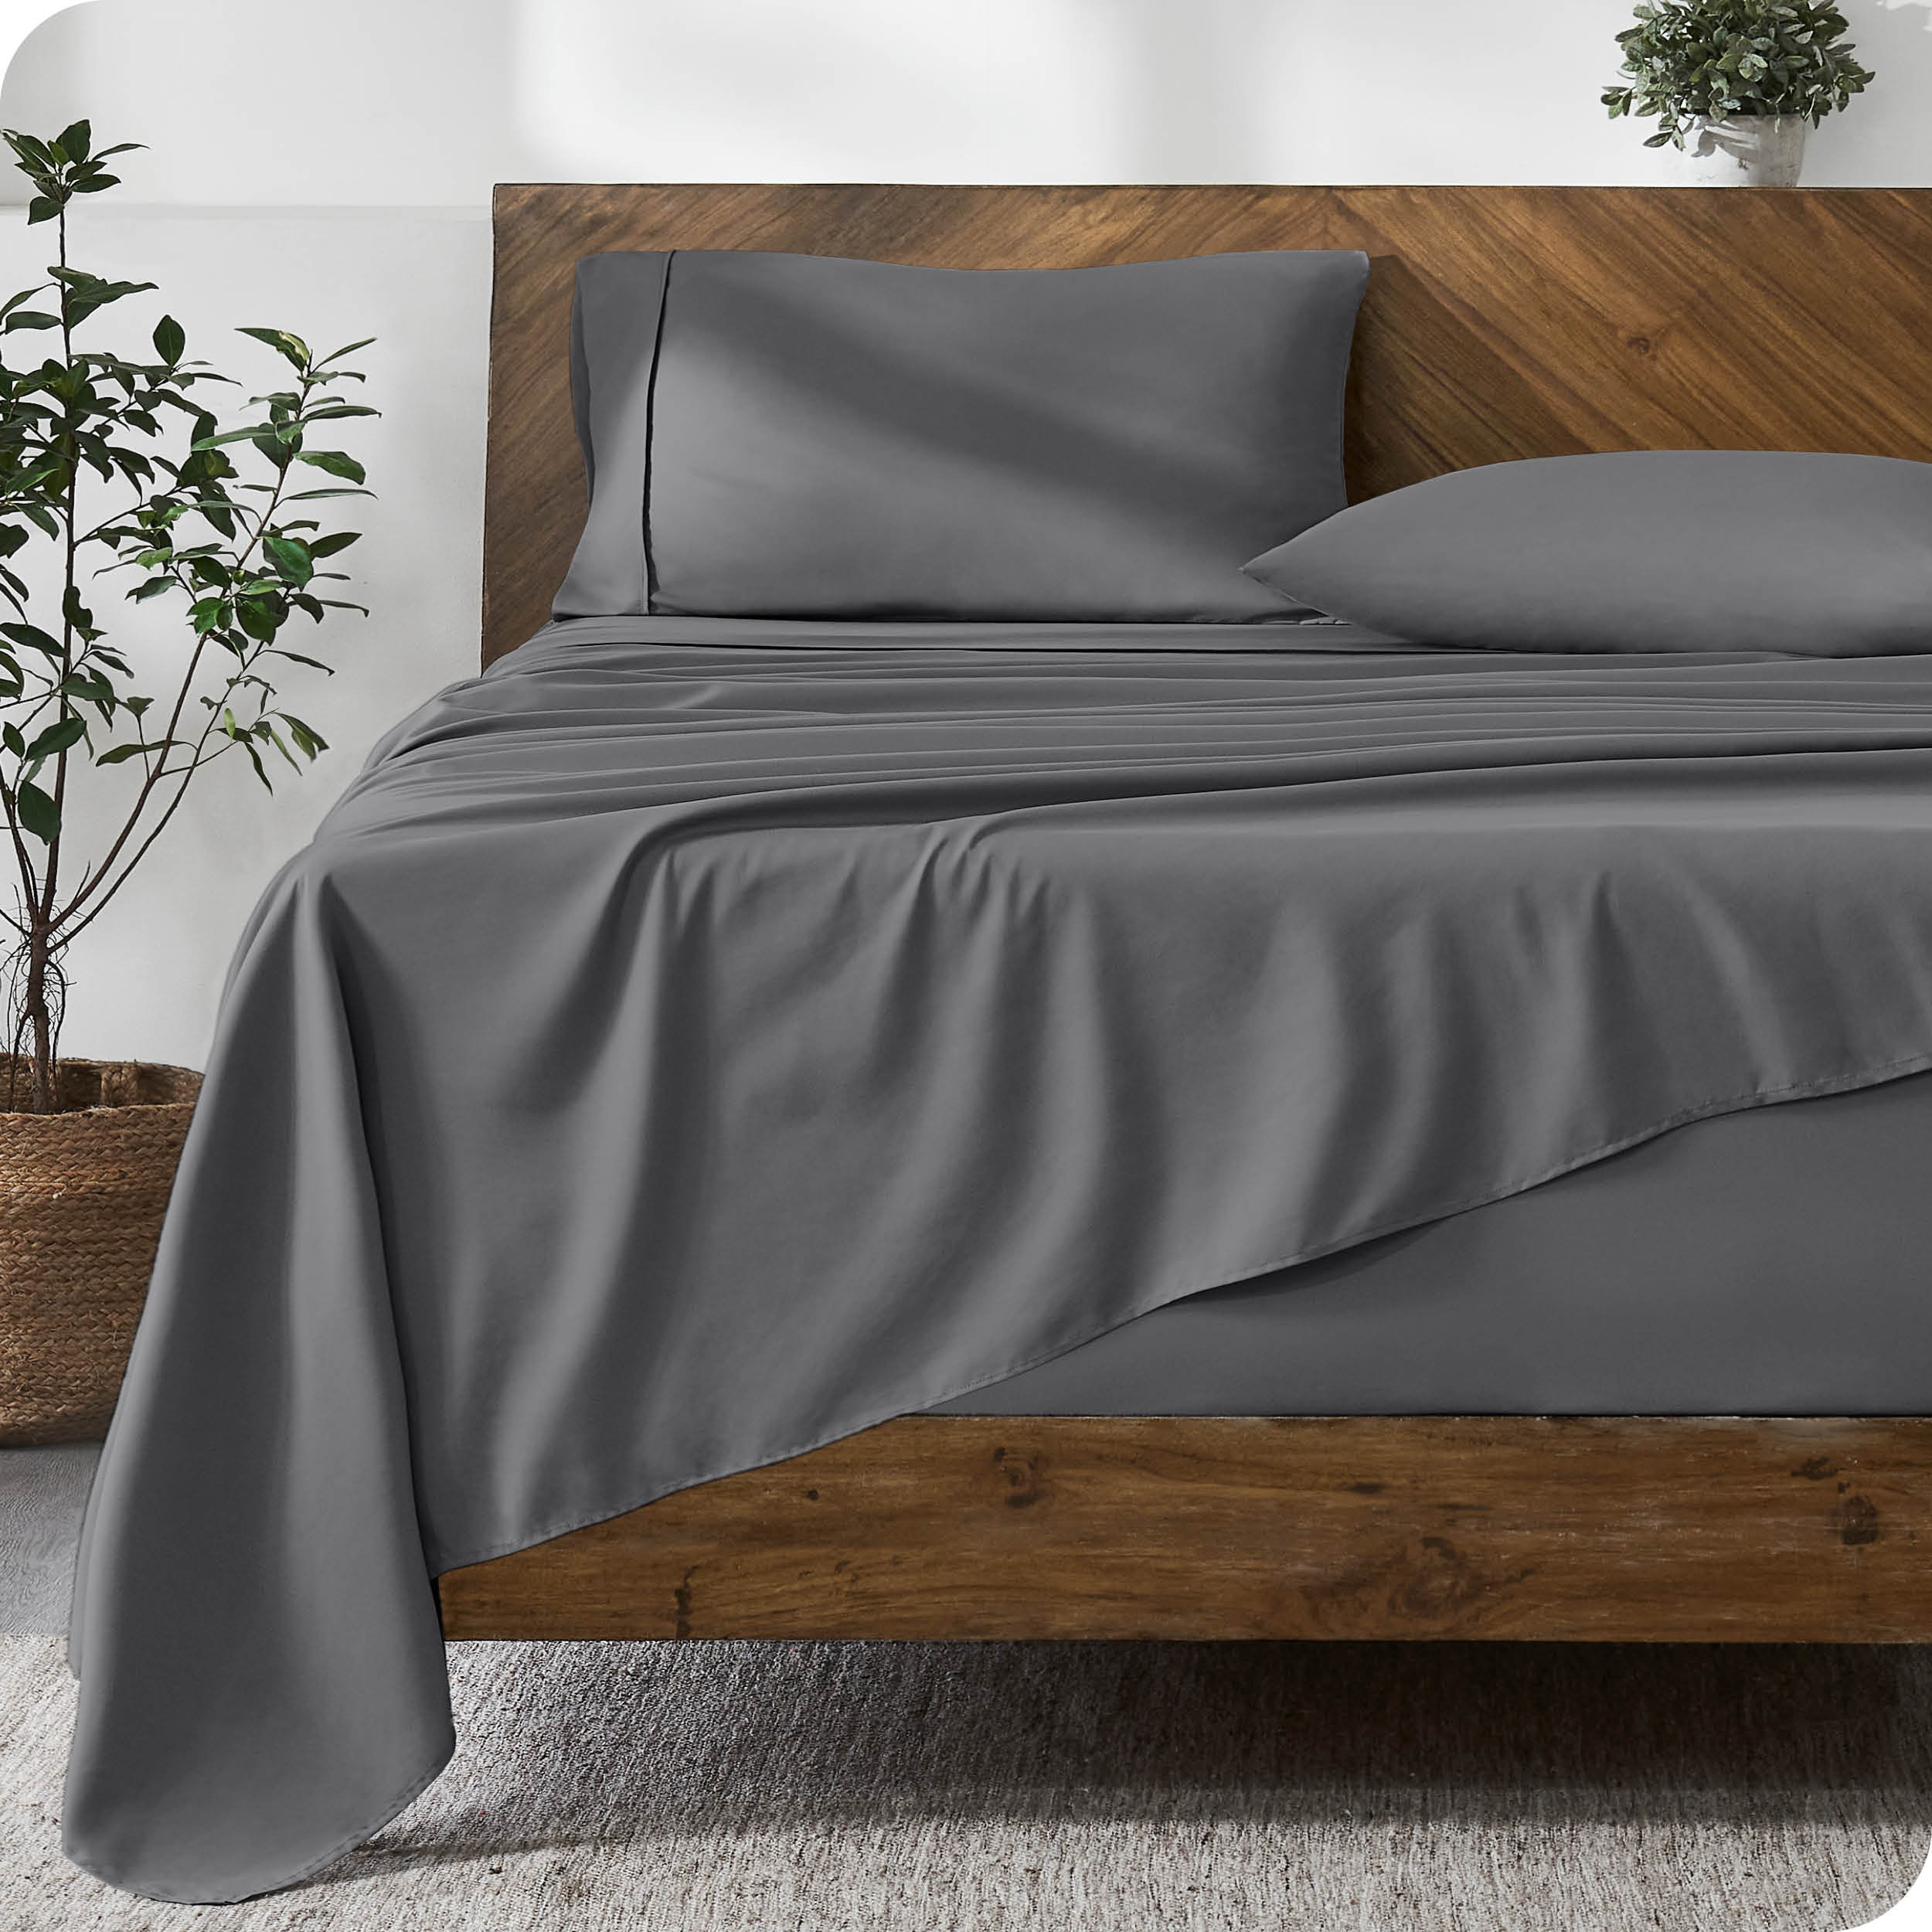 Microfiber Fitted Sheet Bare Home Color: Midnight Blue, Size: Twin